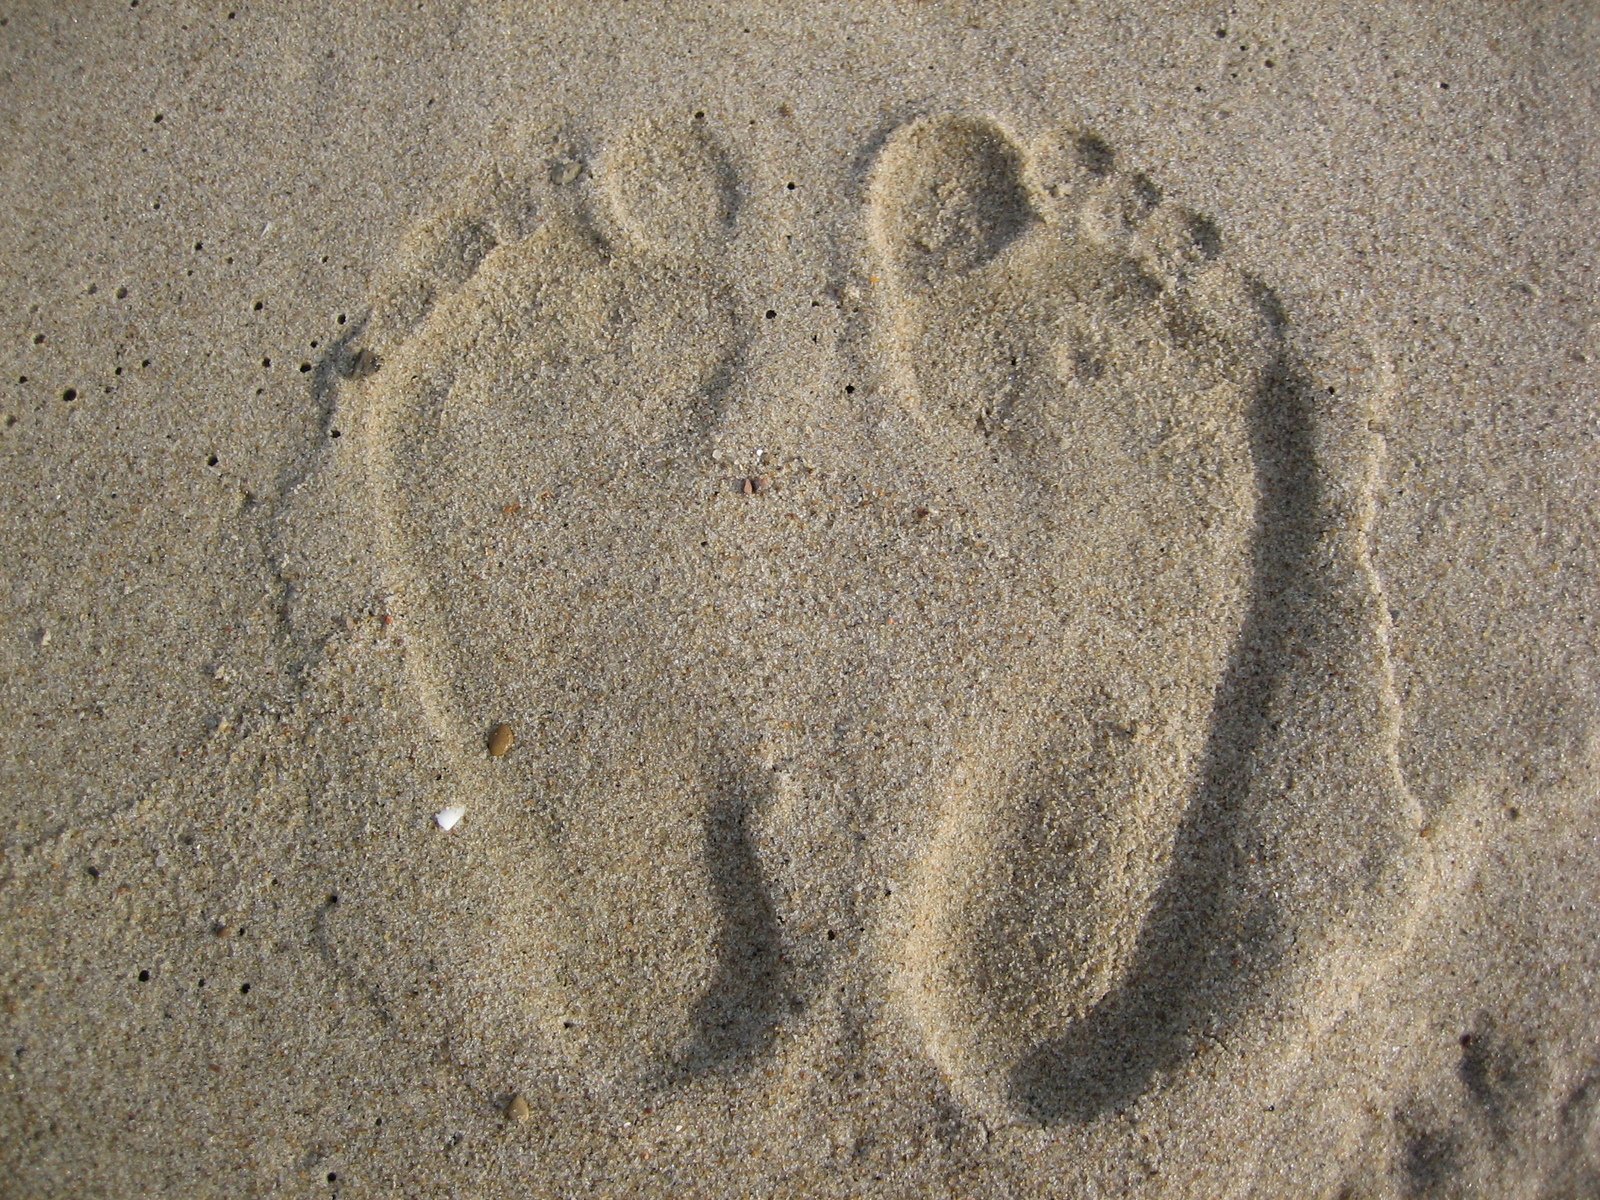 an animal's foot prints are in the sand